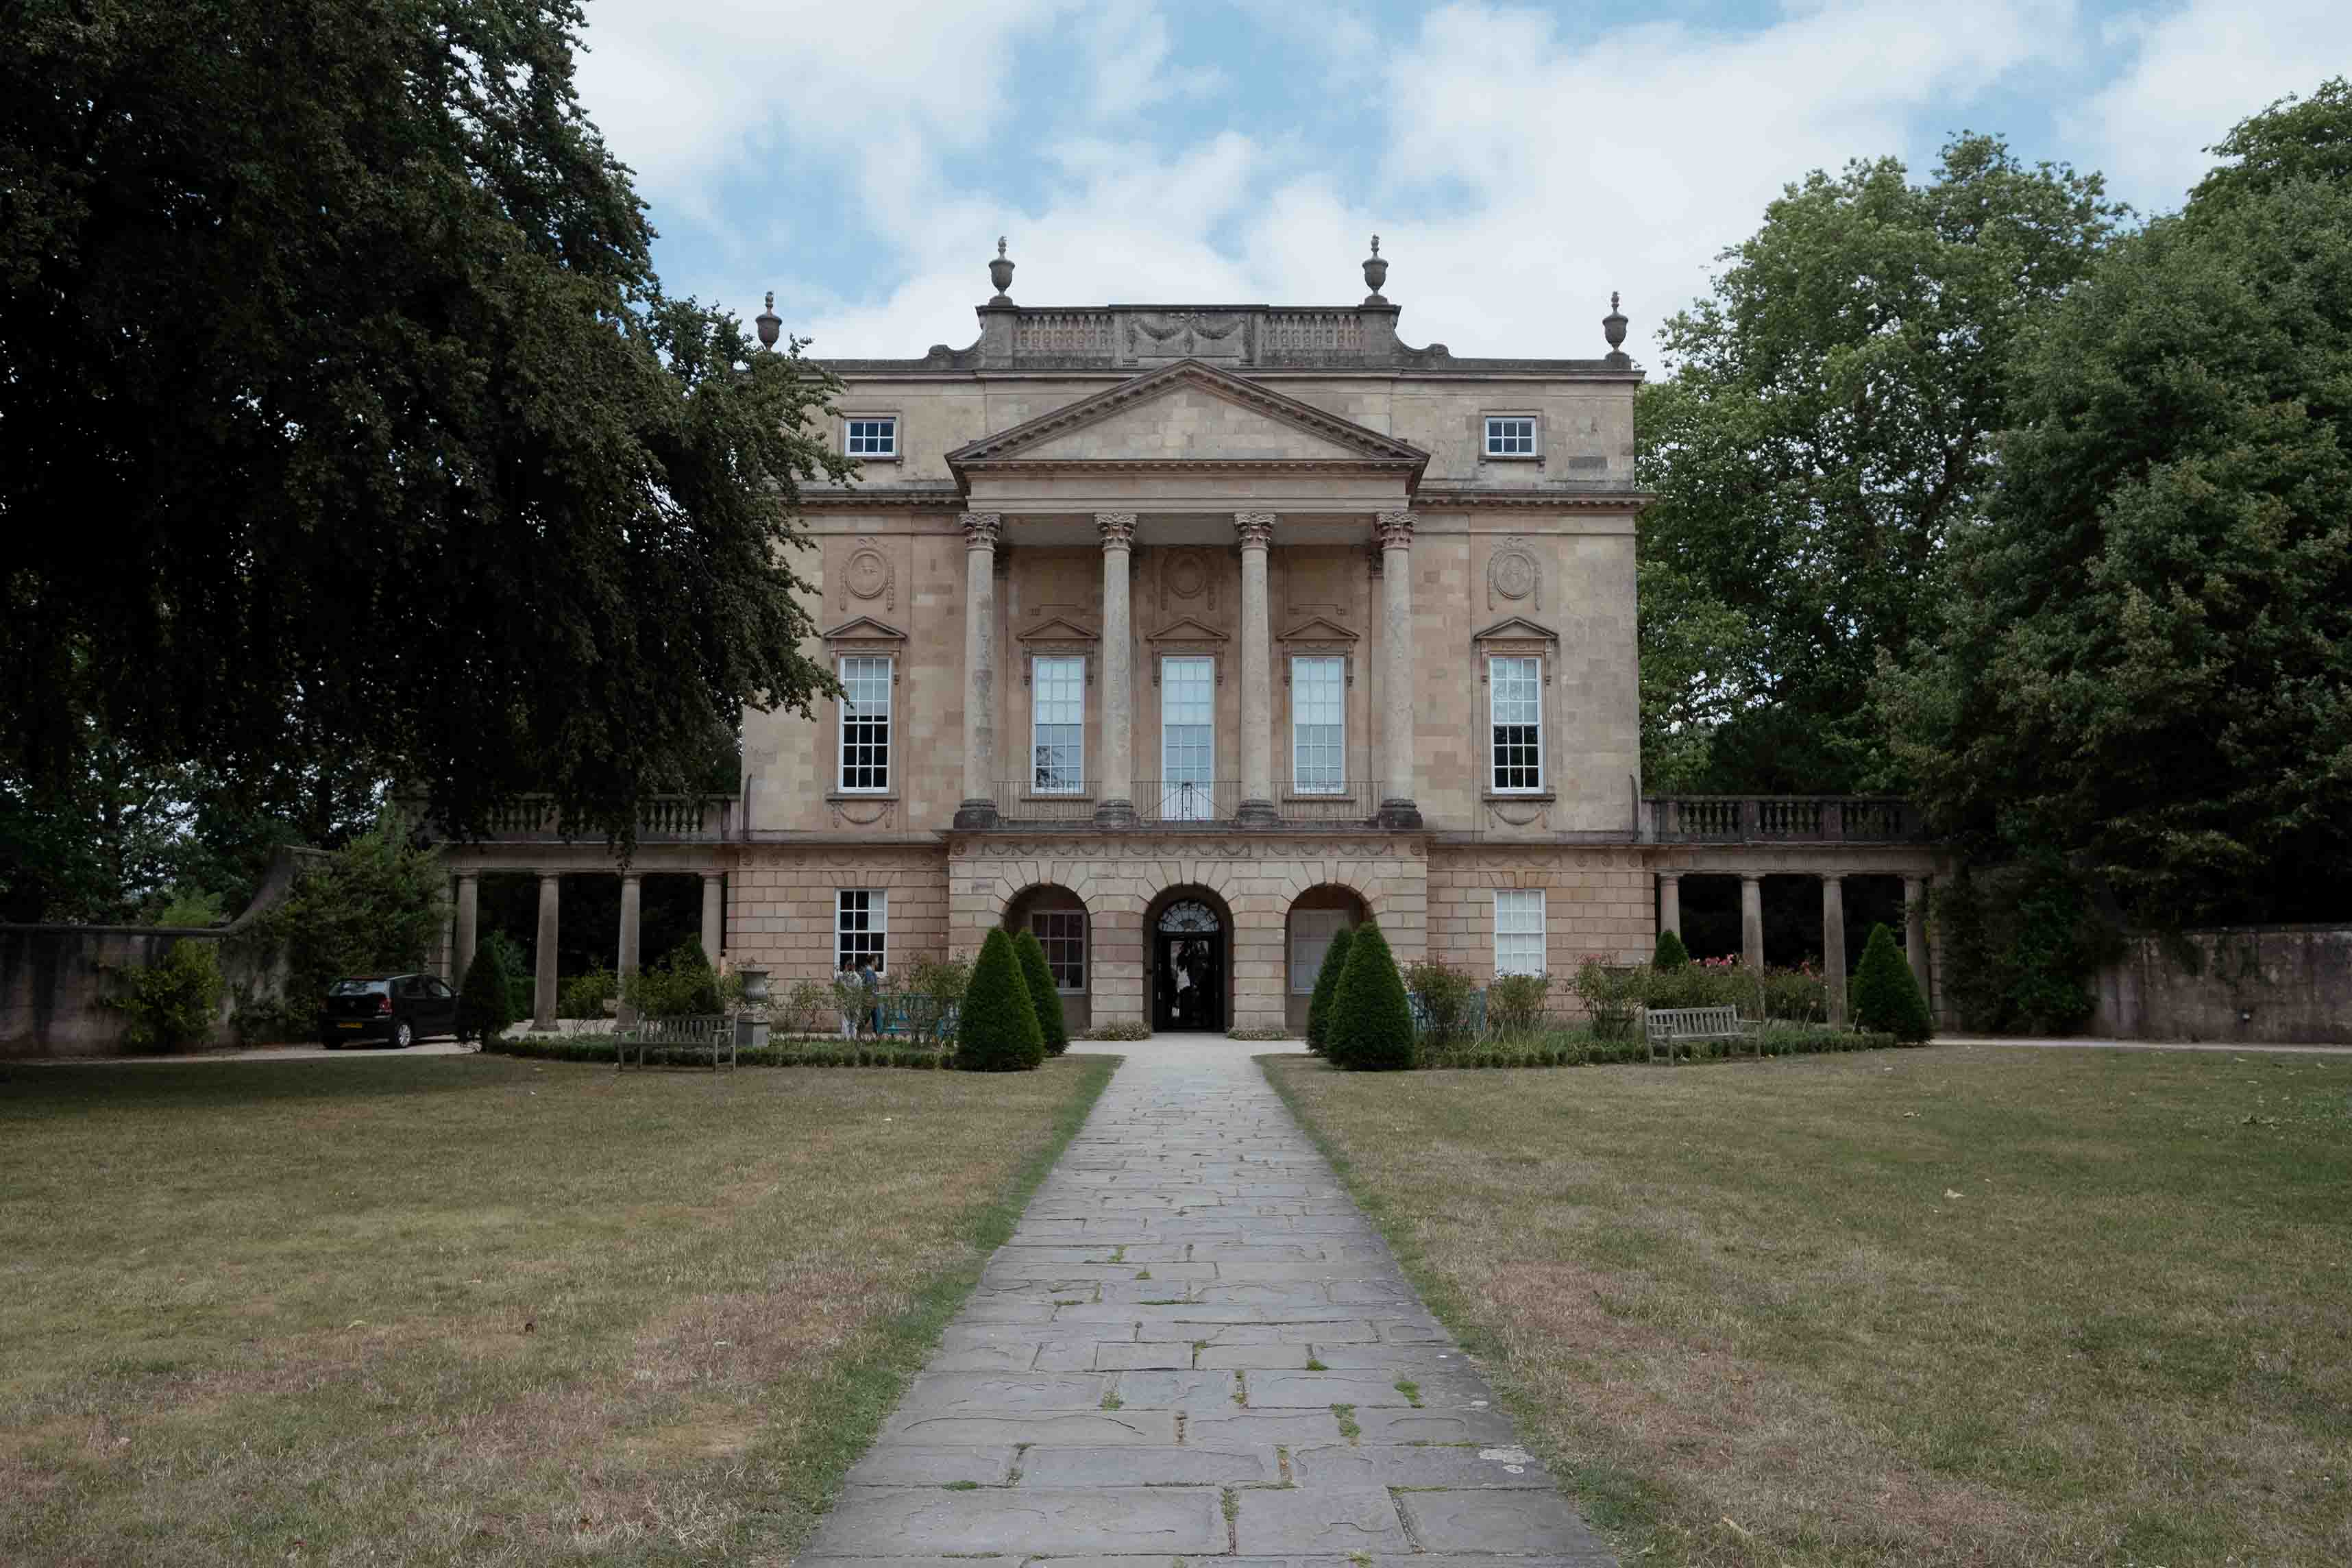 A historic house with manicured lawns in the Cotswolds